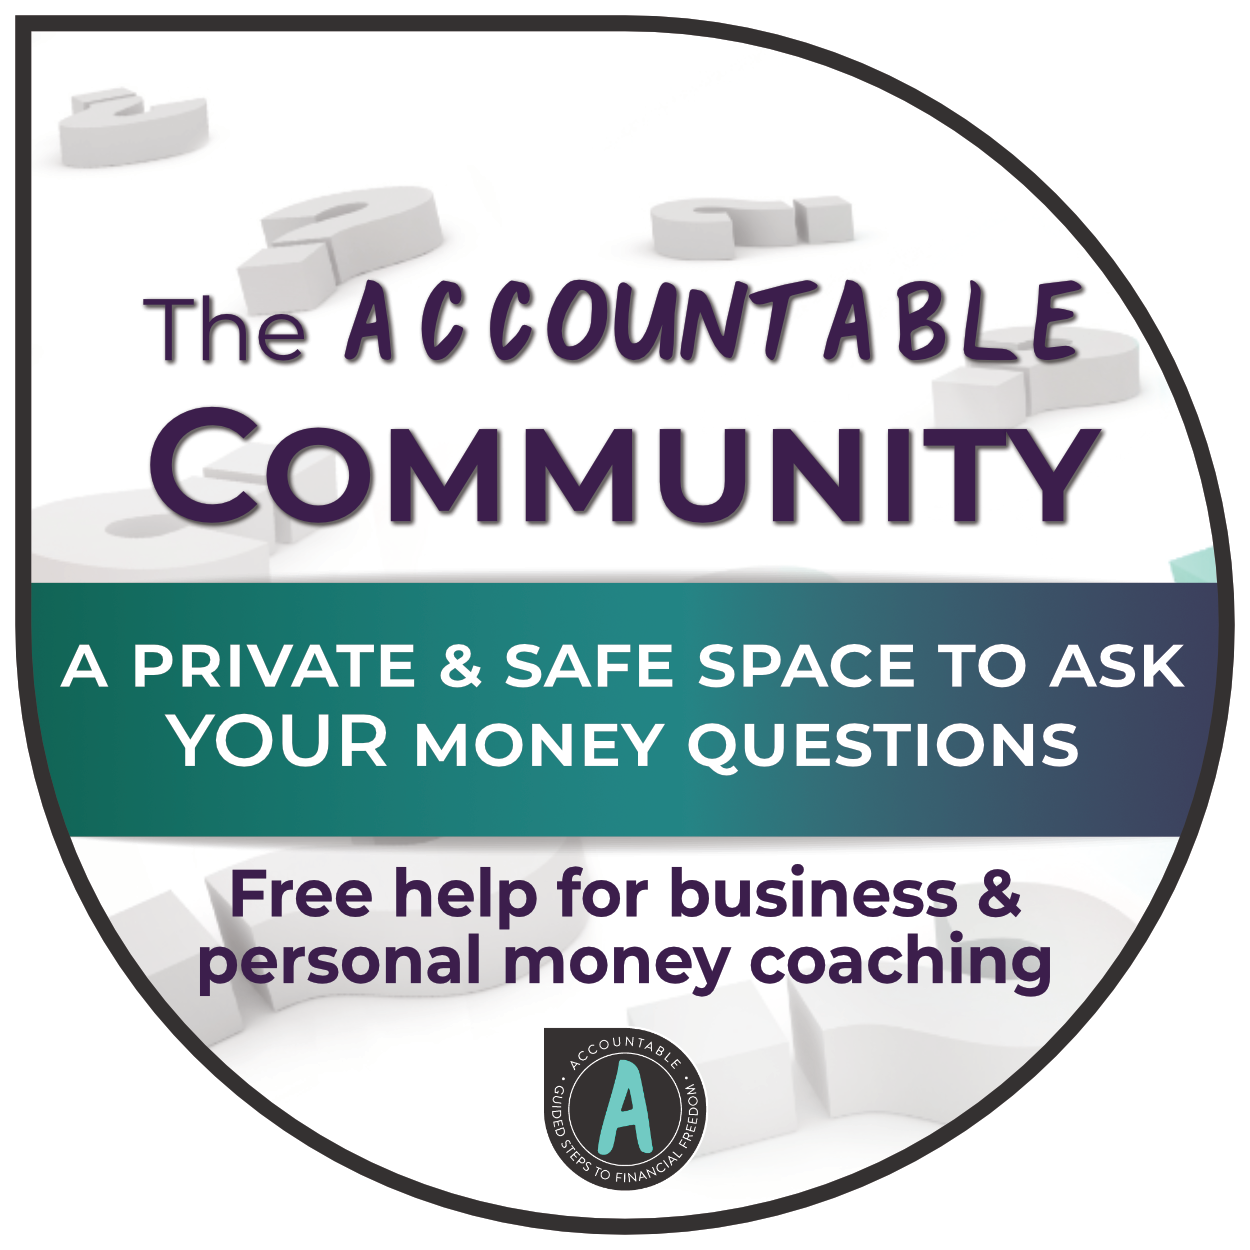 Volunteer Coach for the Accountable Community